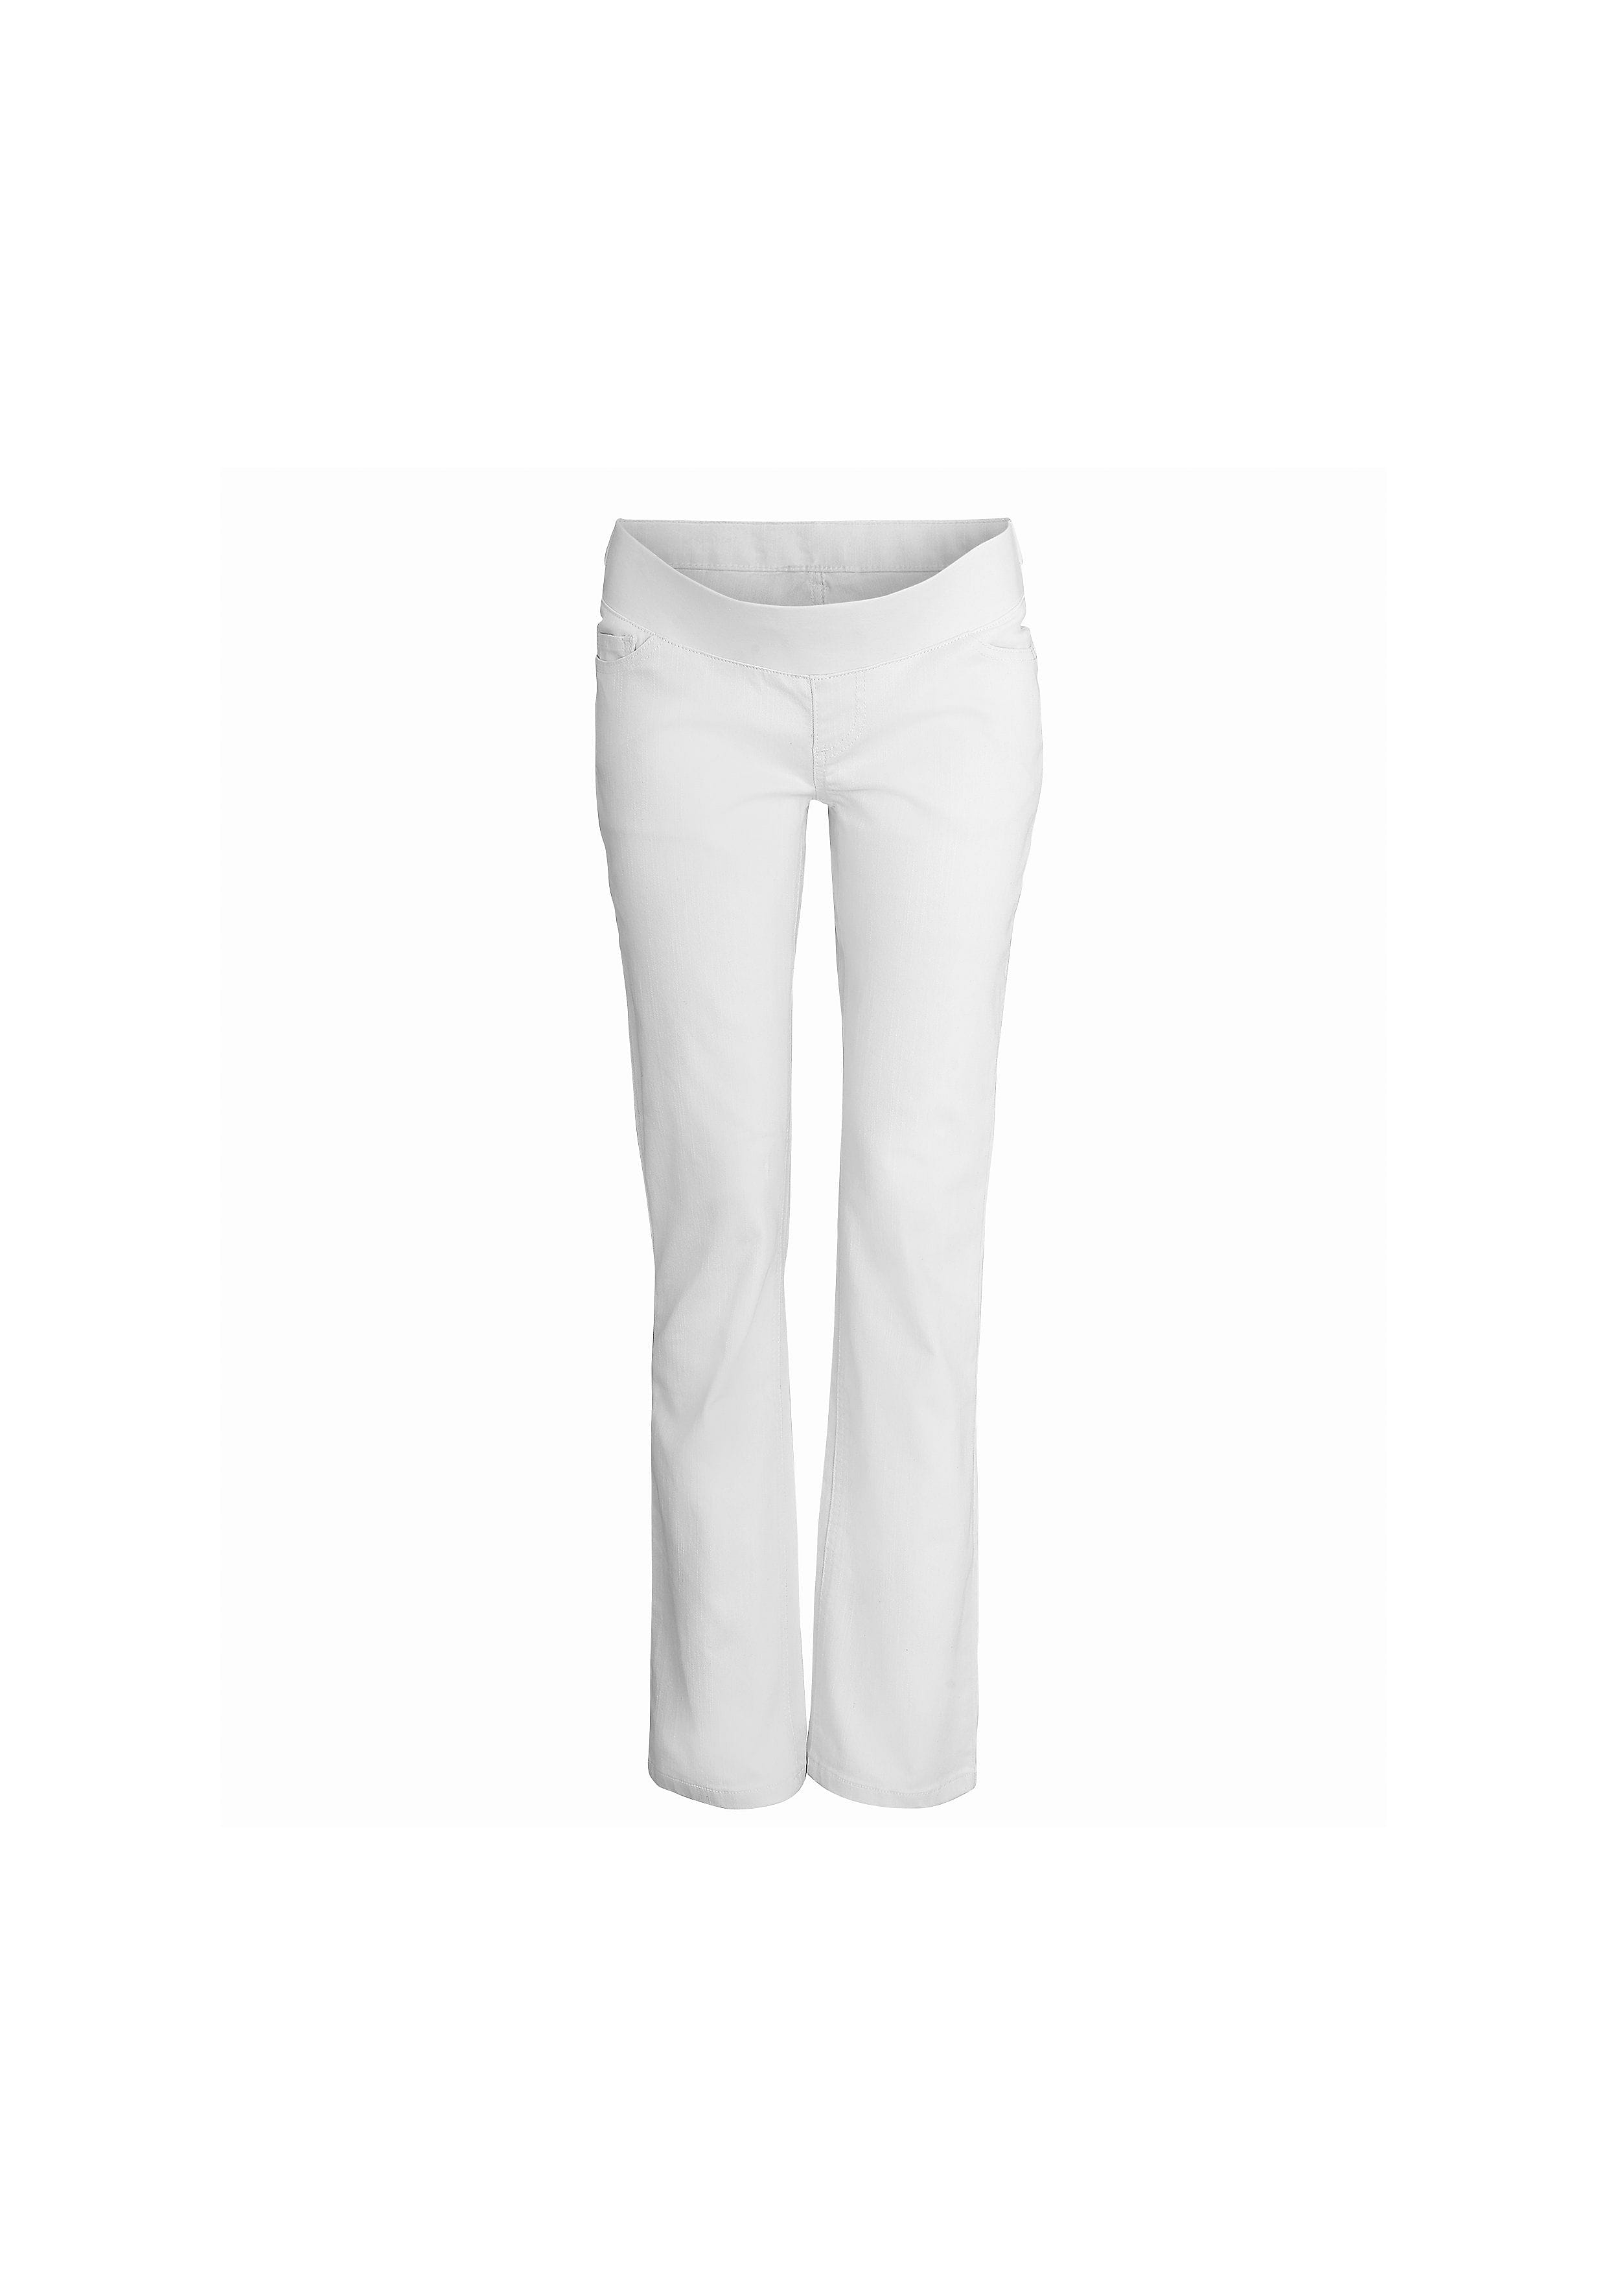 Mothercare | Women Maternity Jeans - White 0